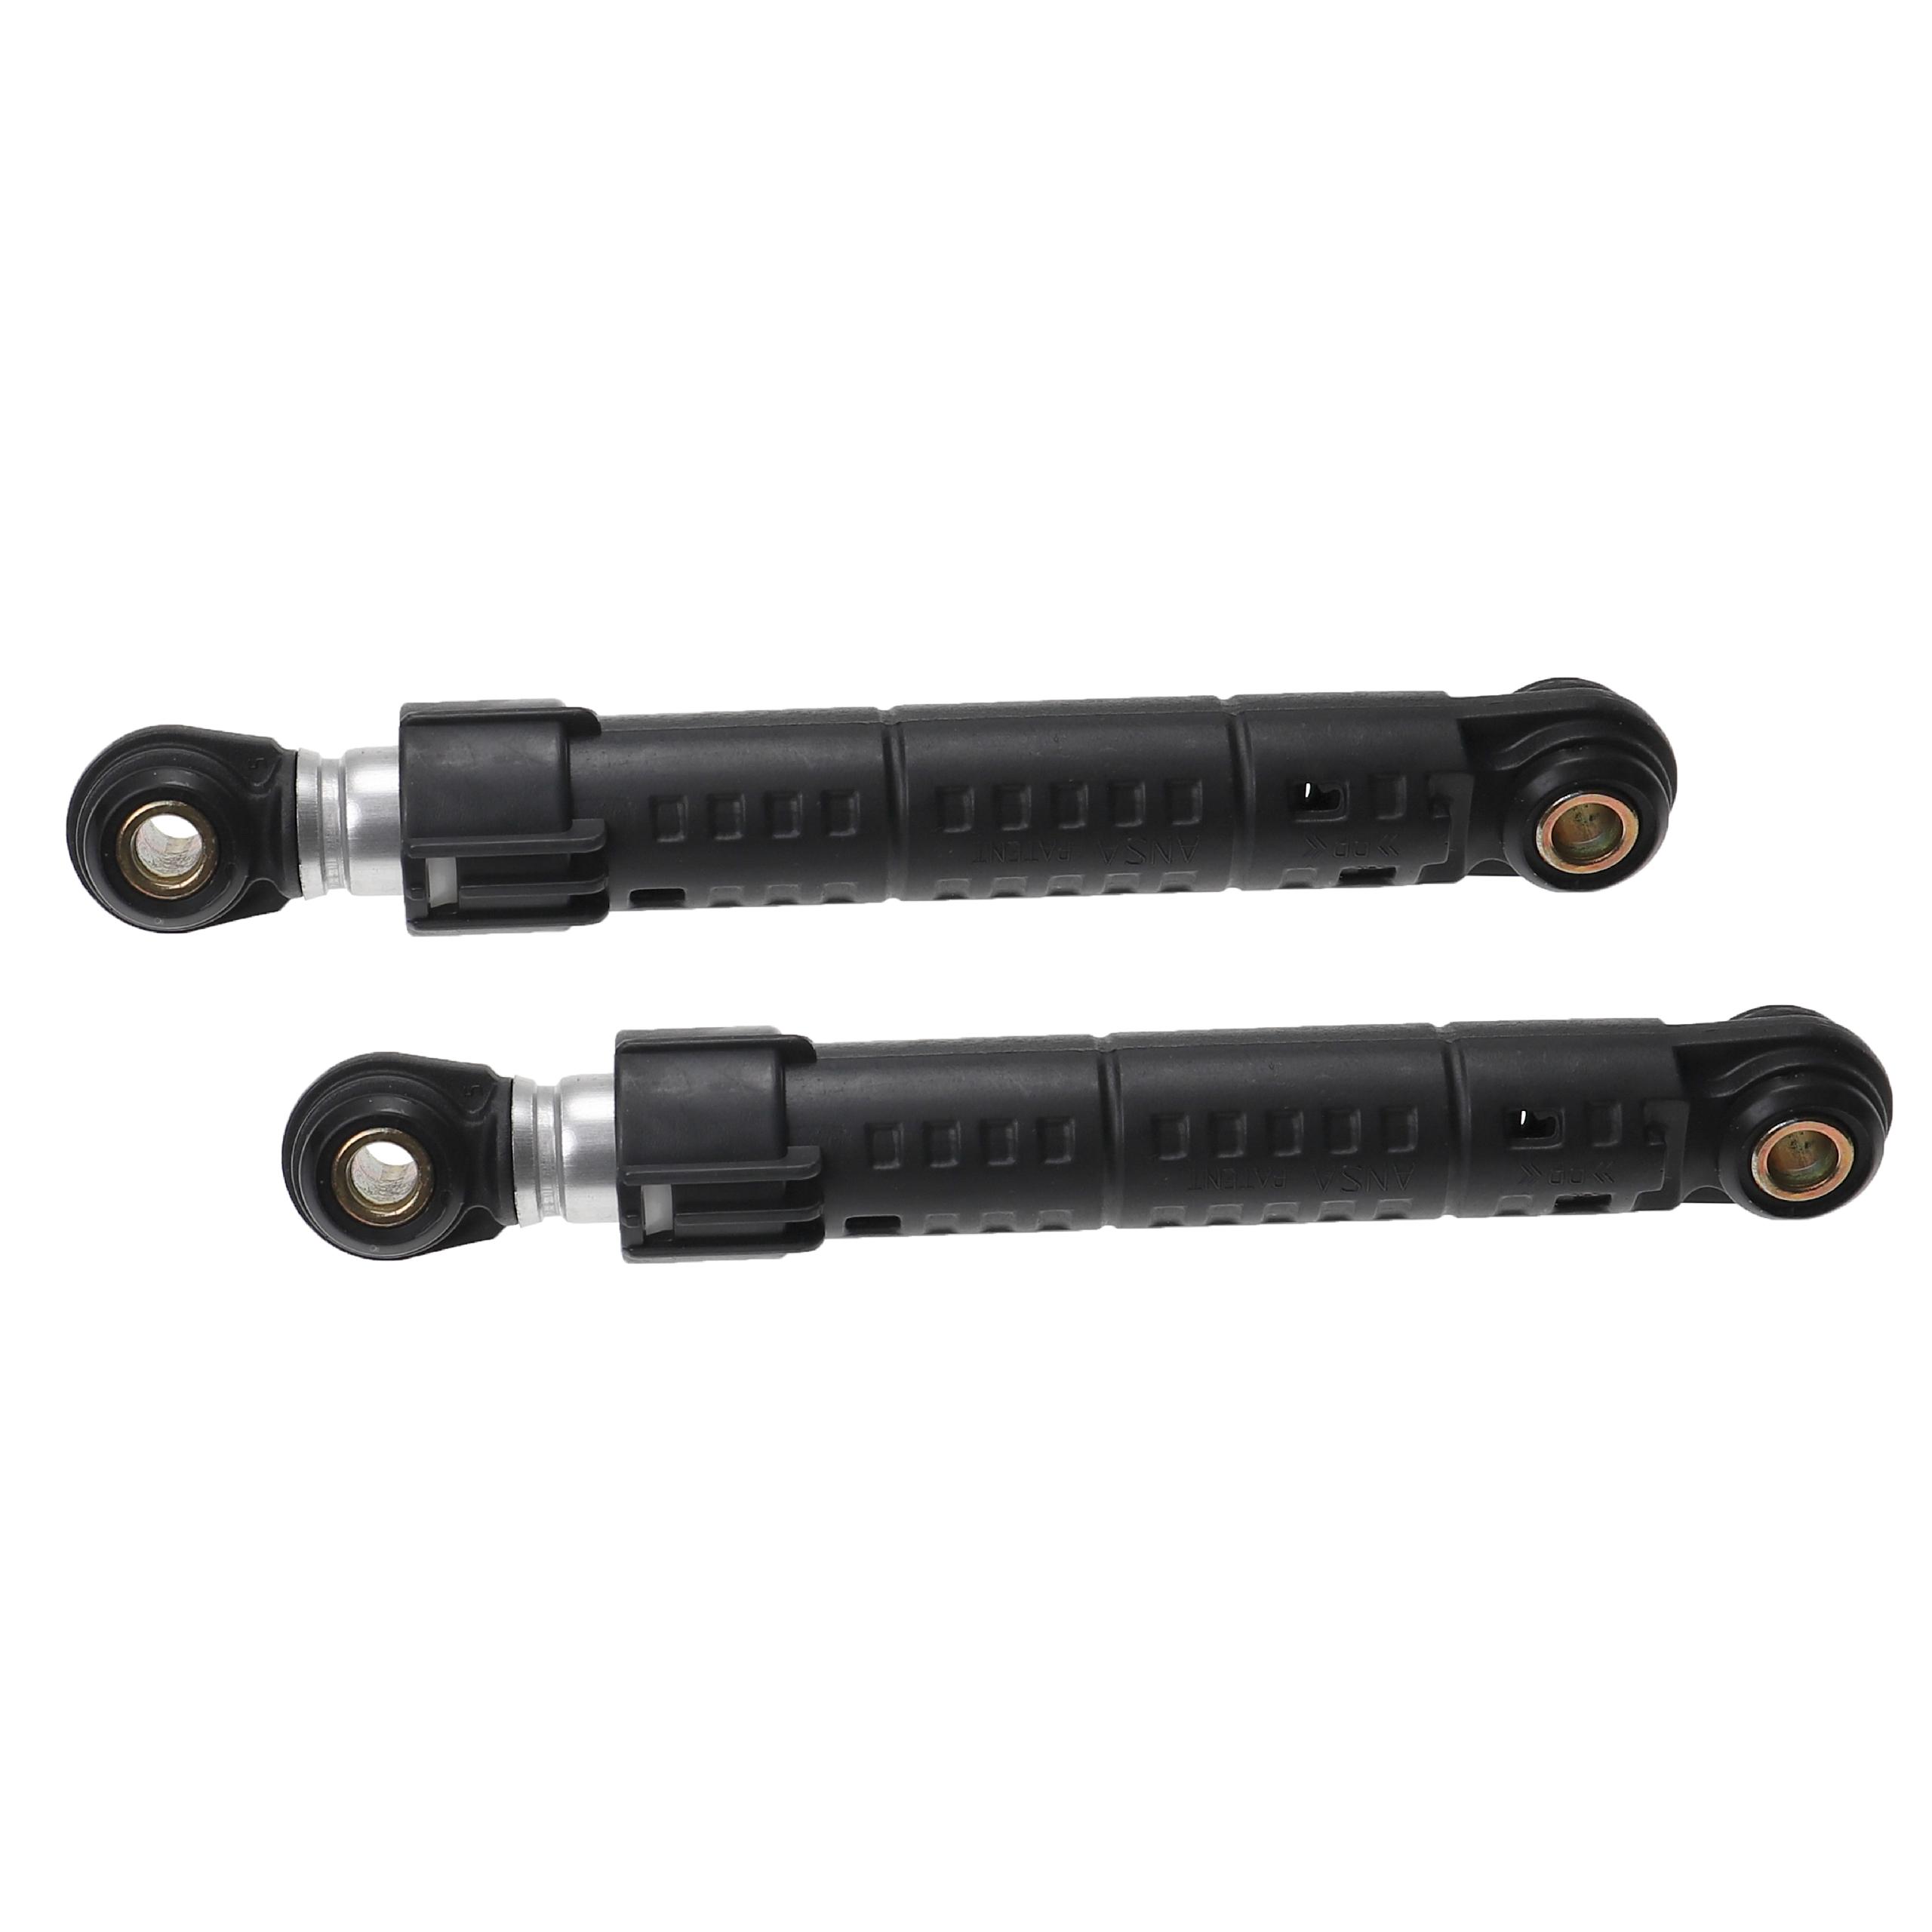 2x Shock Absorber as Replacement for 00439565 for Washing Machine - 60 N